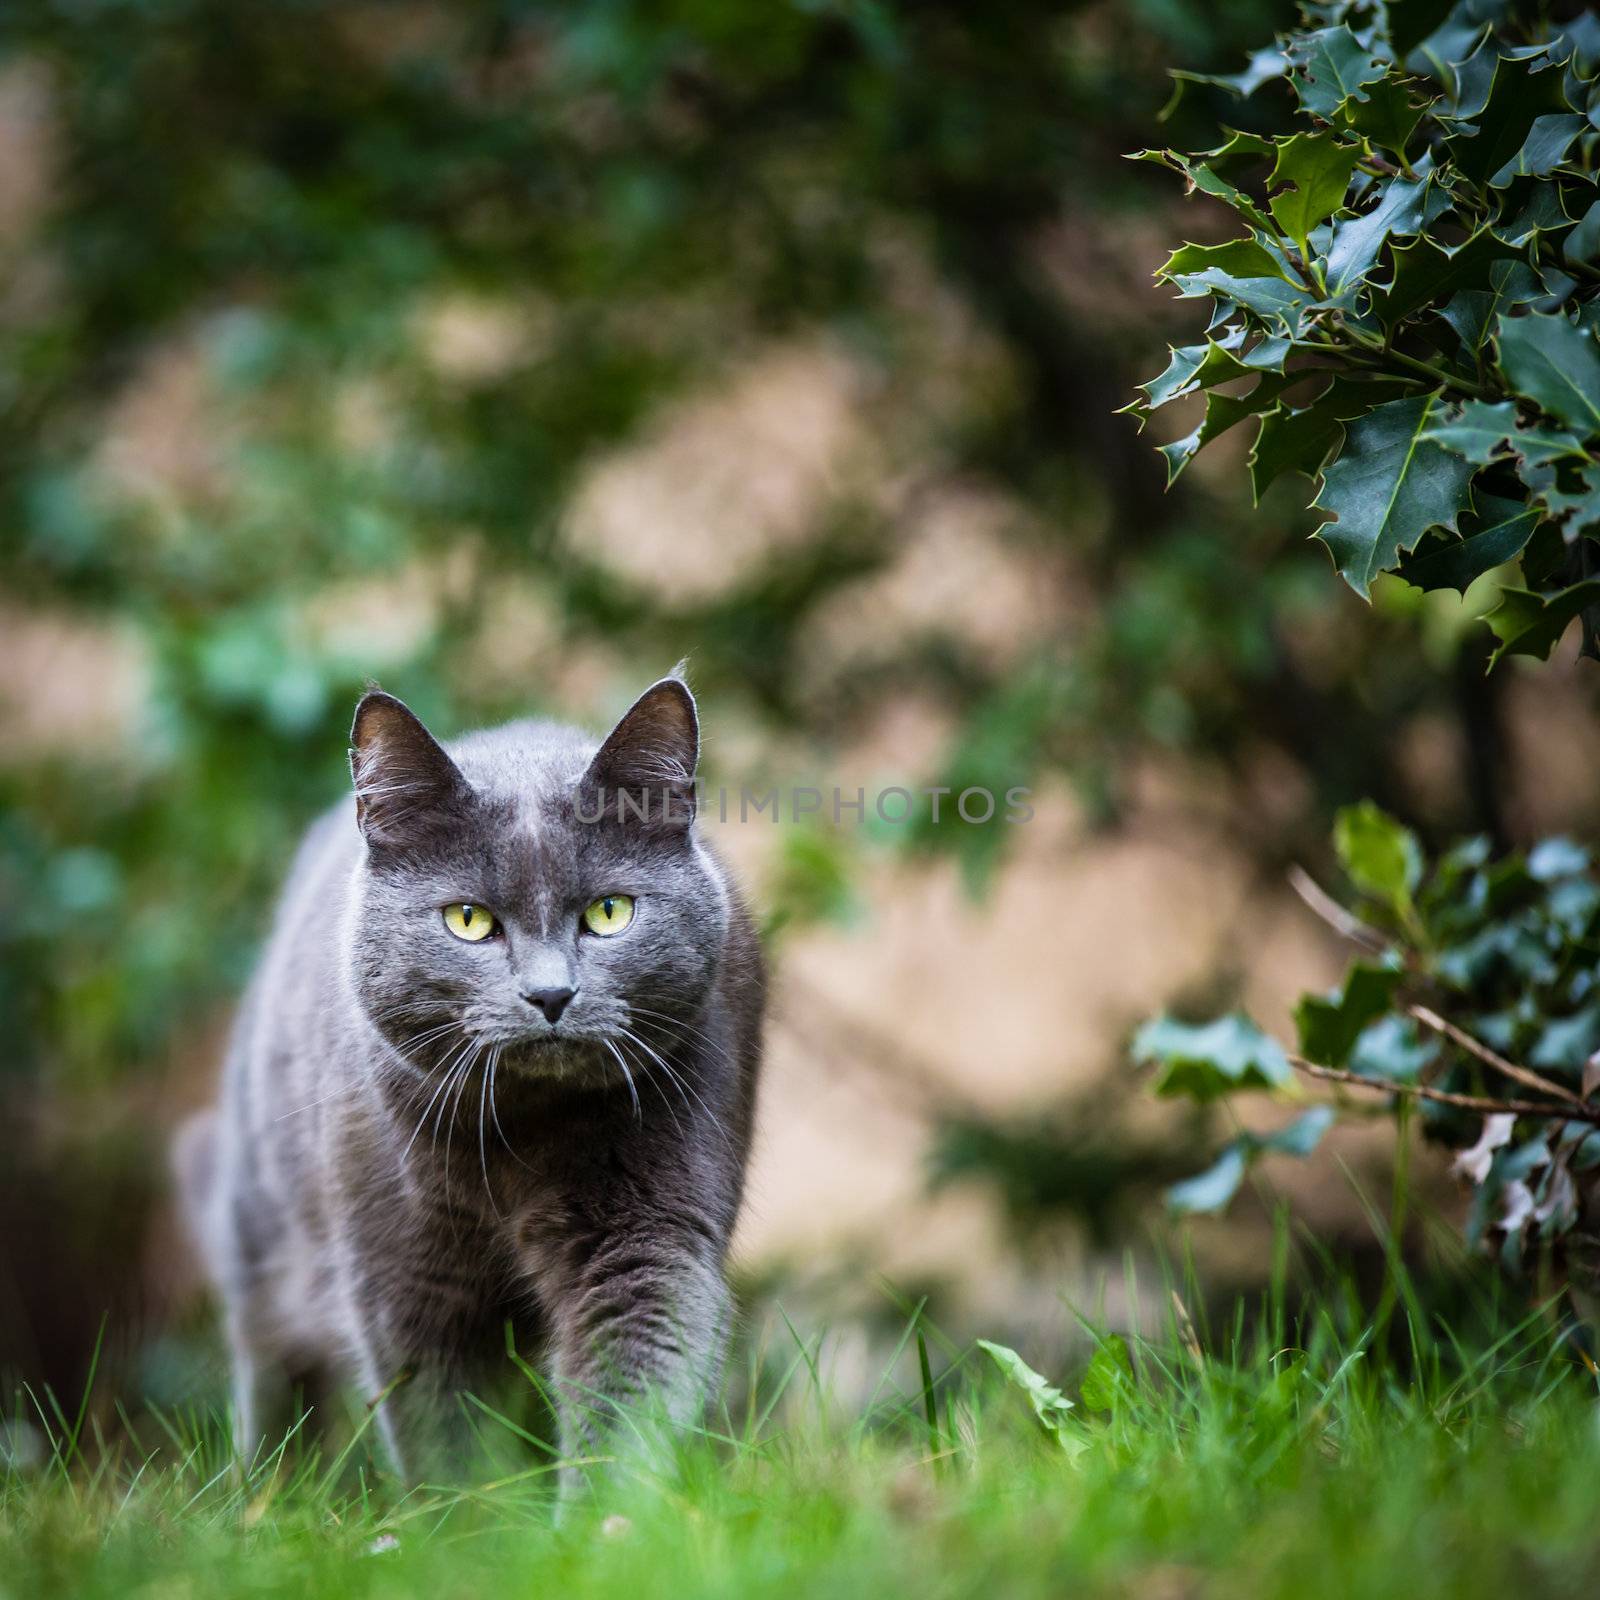 Cat outdoors on a green lawn, walking towards you by viktor_cap